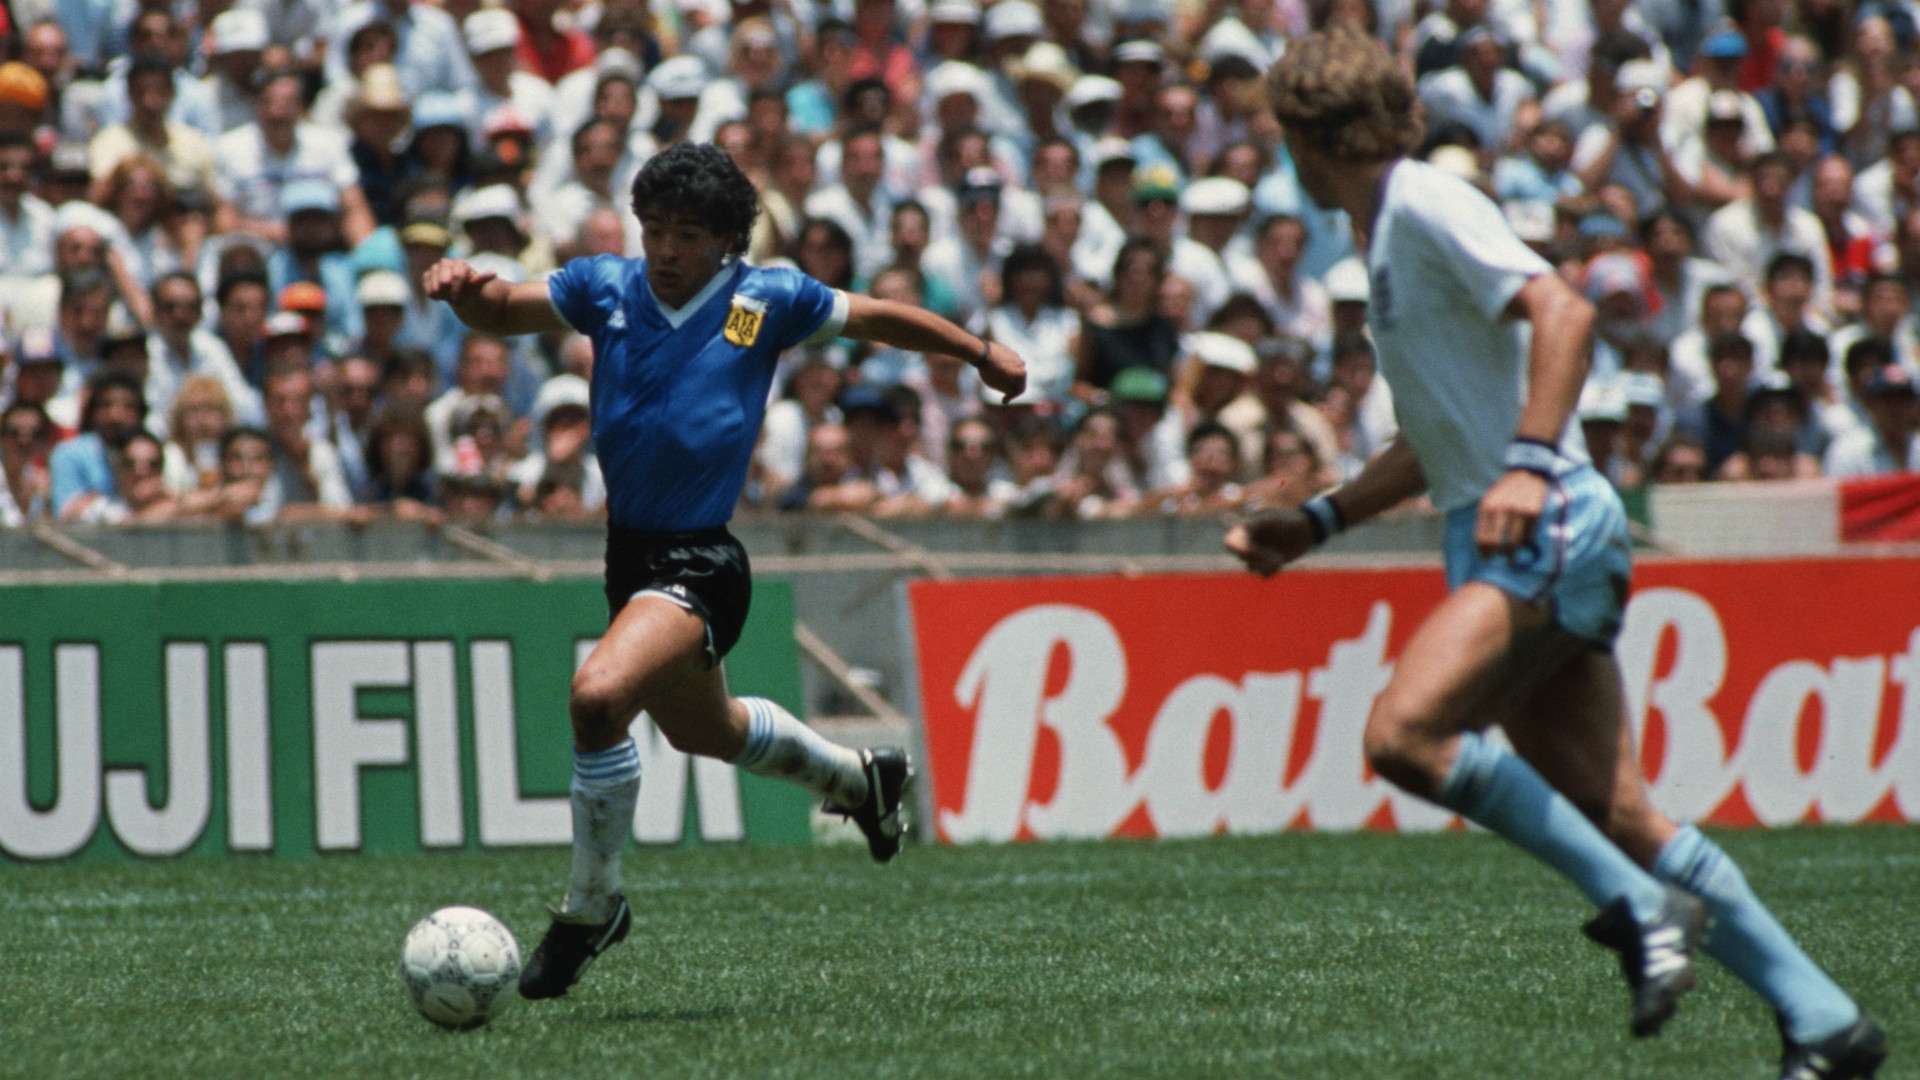 The Hand of God' is why Maradona was hated by some but loved